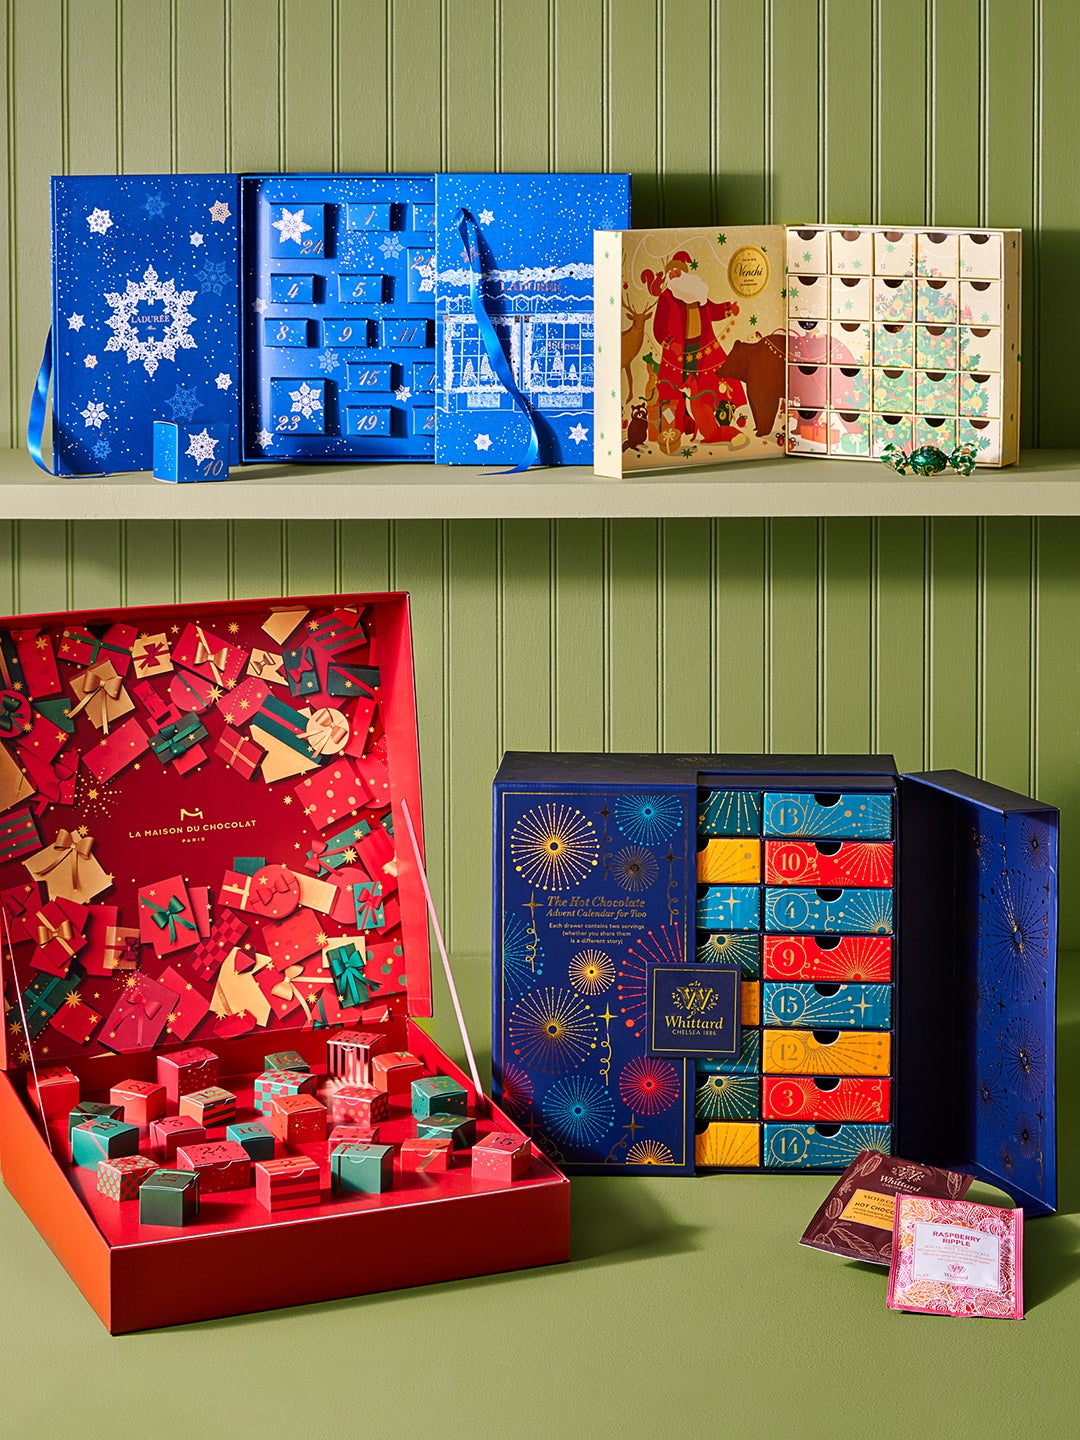 Multiple Advent Calendars in Blue, Red, and Mulit-colored Boxes from Food52 Opened in front of Green Slatted Wall